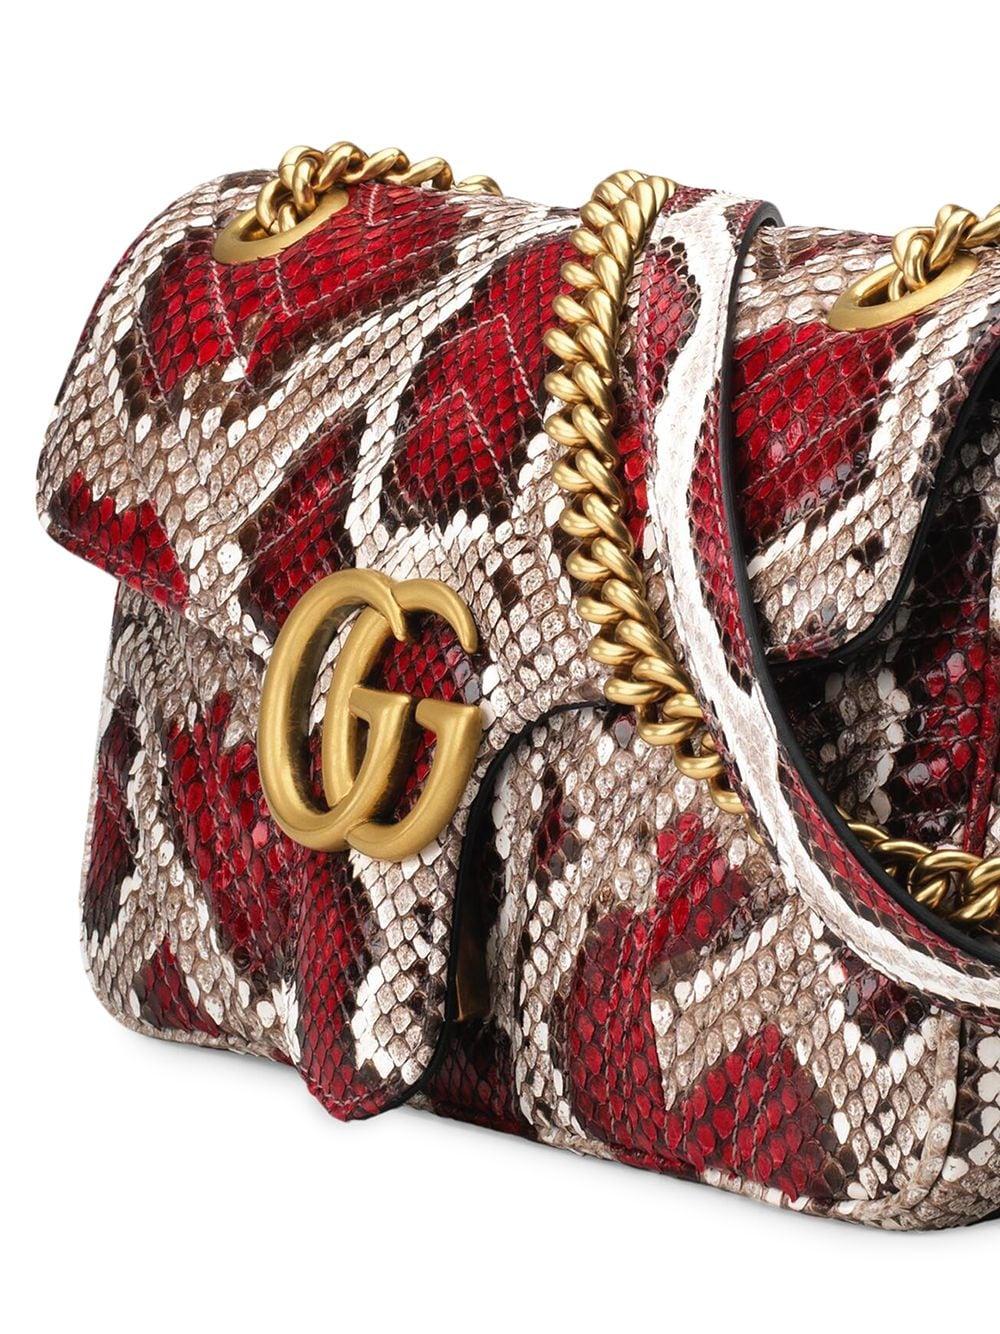 Gucci Red Quilted Leather Marmont Small Shoulder Bag